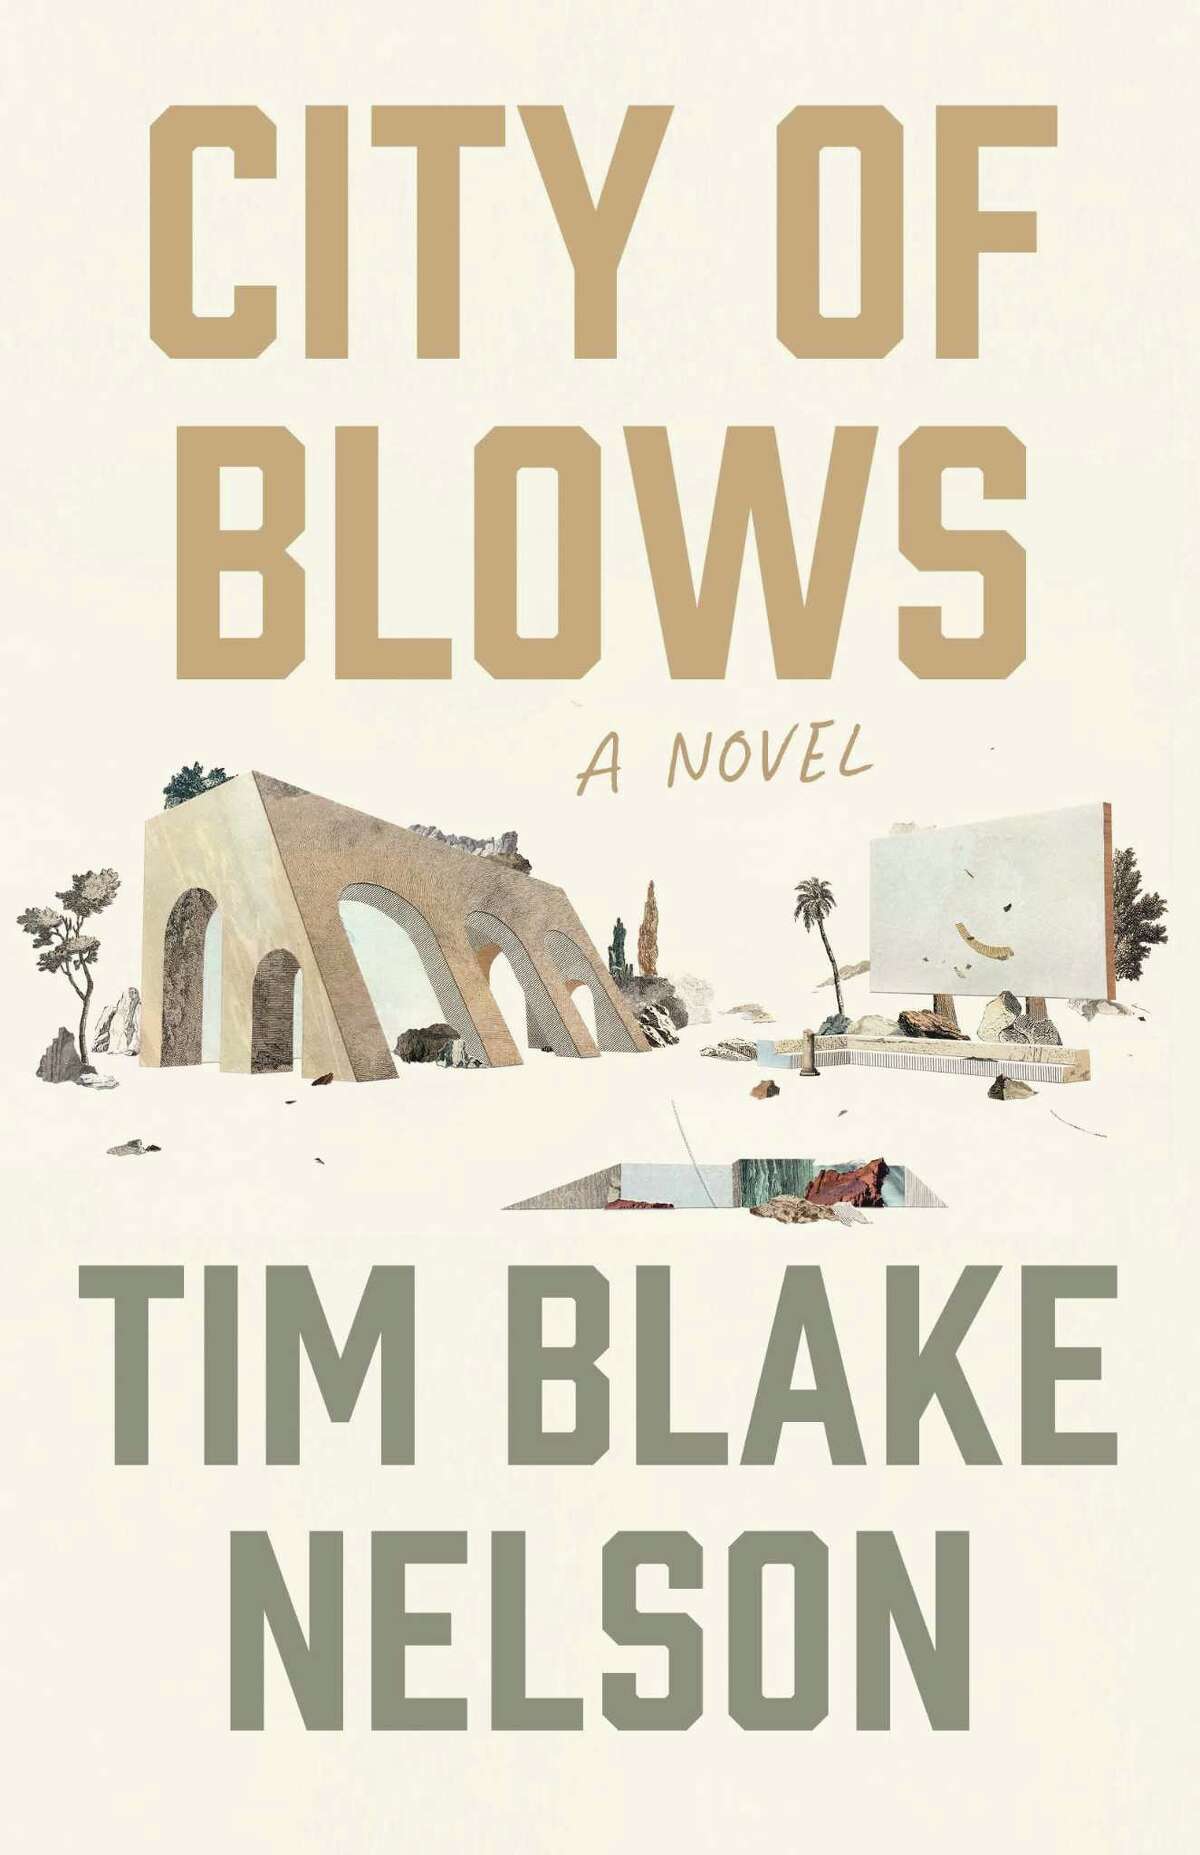 "City of Blows" by Tim Blake Nelson